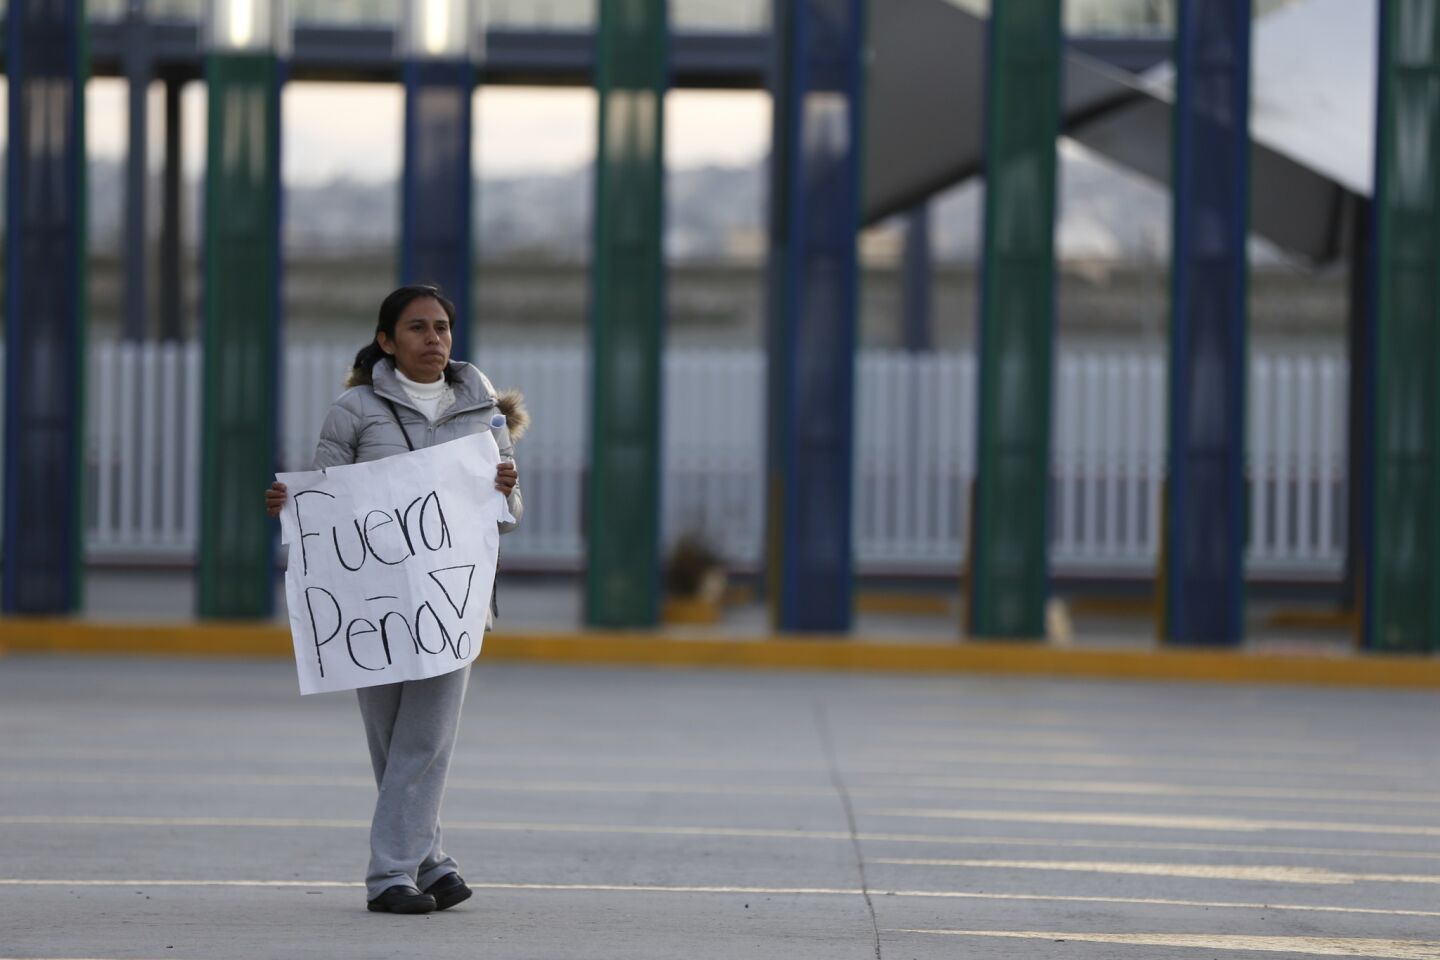 El Chaparral border crossing into Tijuana Mexico was disrupted a second day by protesters.